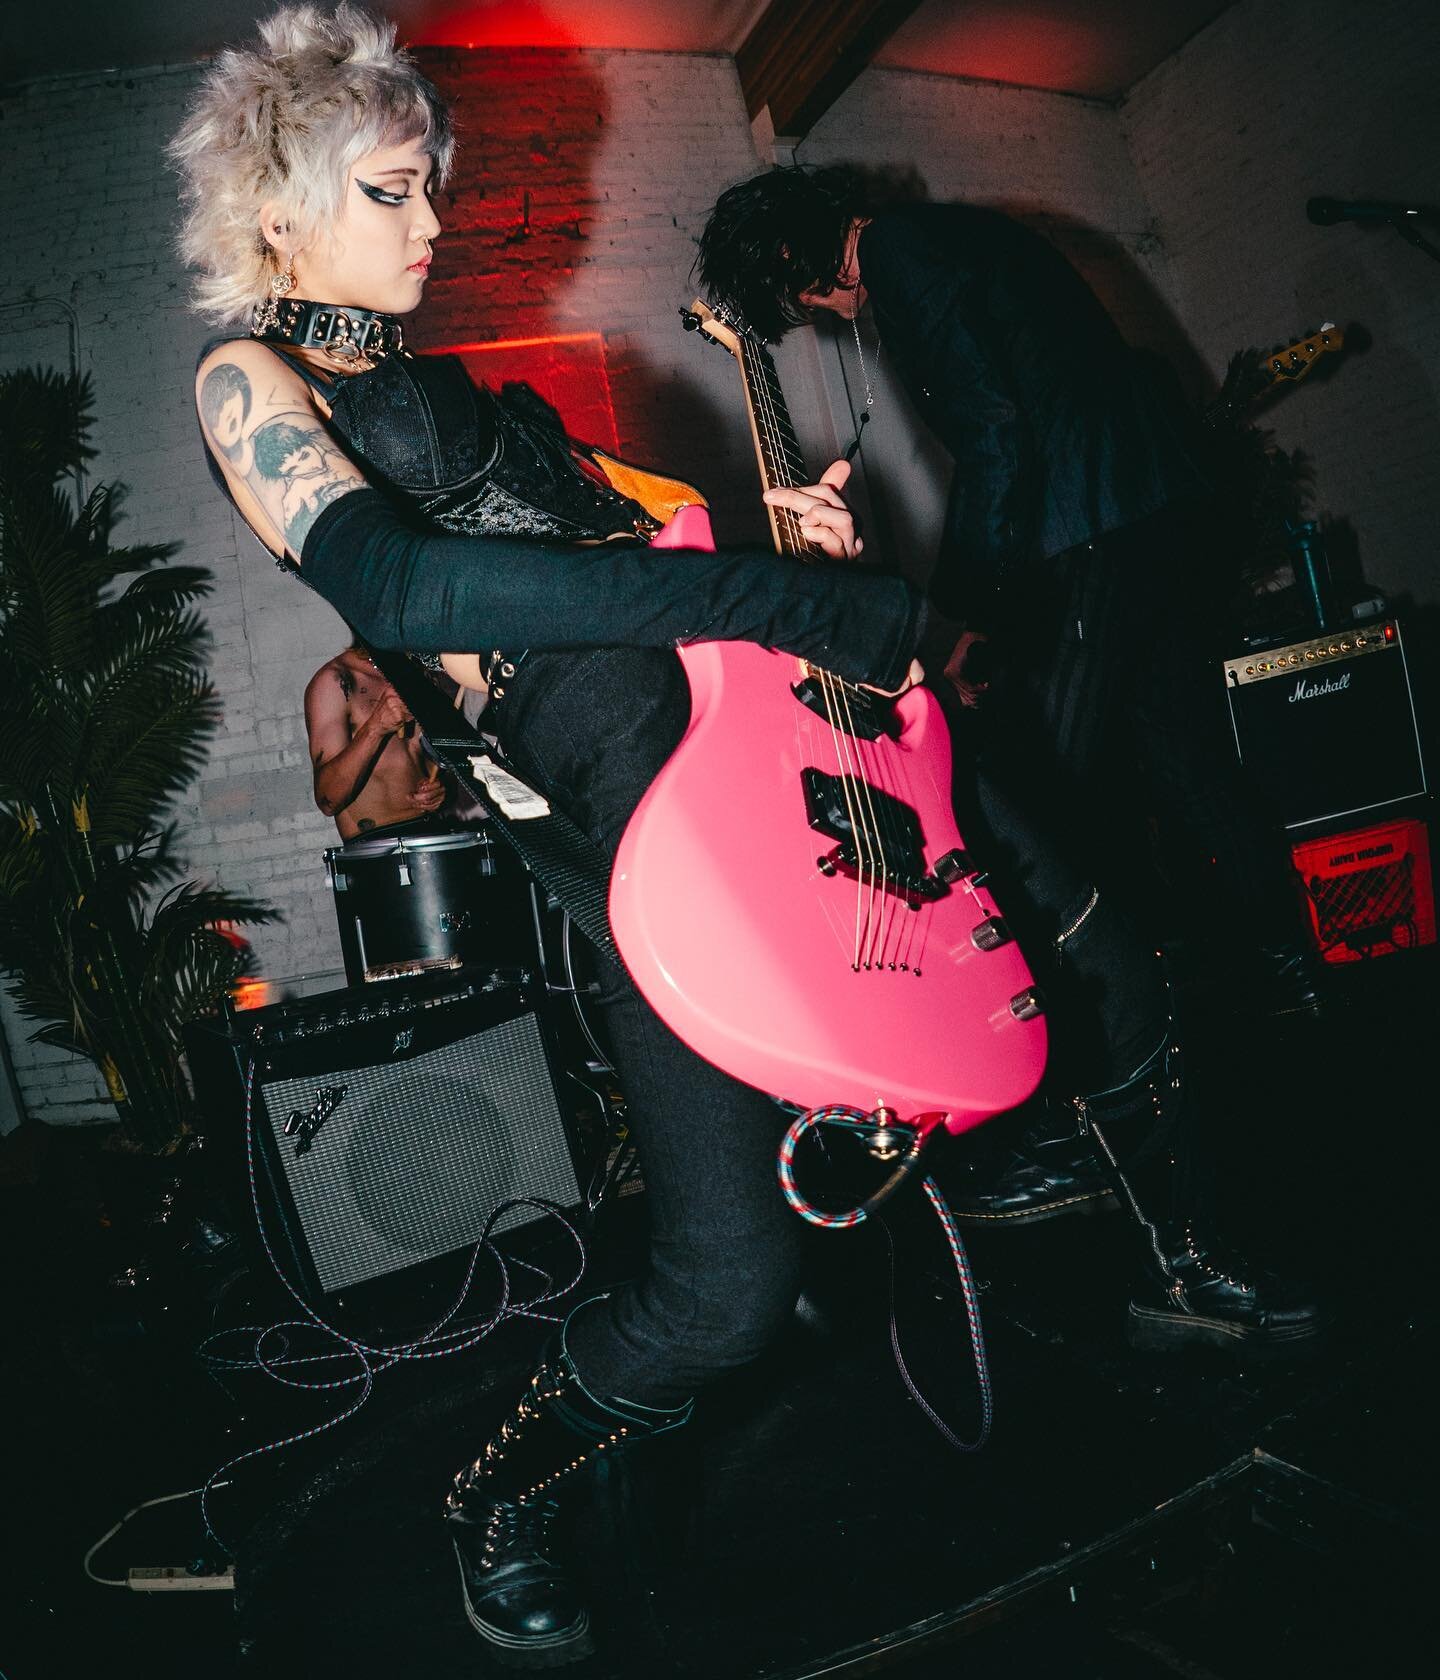 PORTLAND 🗣️ Tonight&rsquo;s our night! See you all there! Swipe for all the details 🖤 
.
📸 - @reneexmedia 
.
.
.
.
.
.
.
.
.
#fangbanger #fangbangerband #coffinkids #gothband #emoband #guitaristsofinstagram